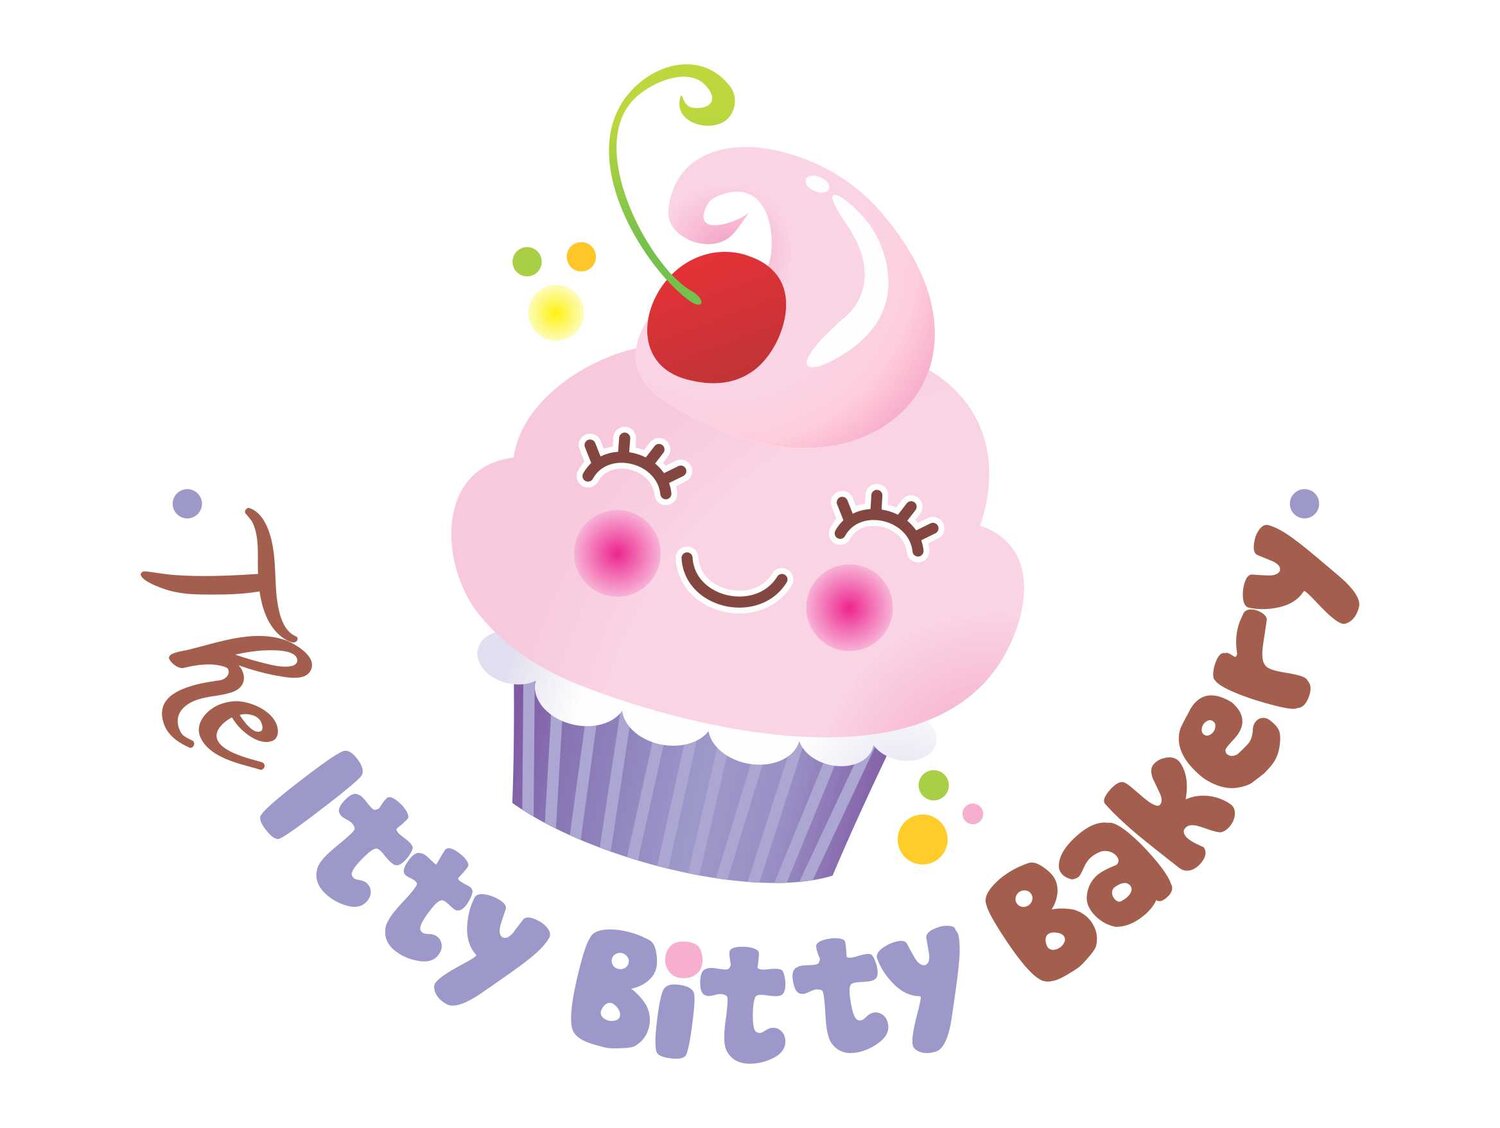 The Itty Bitty Bakery